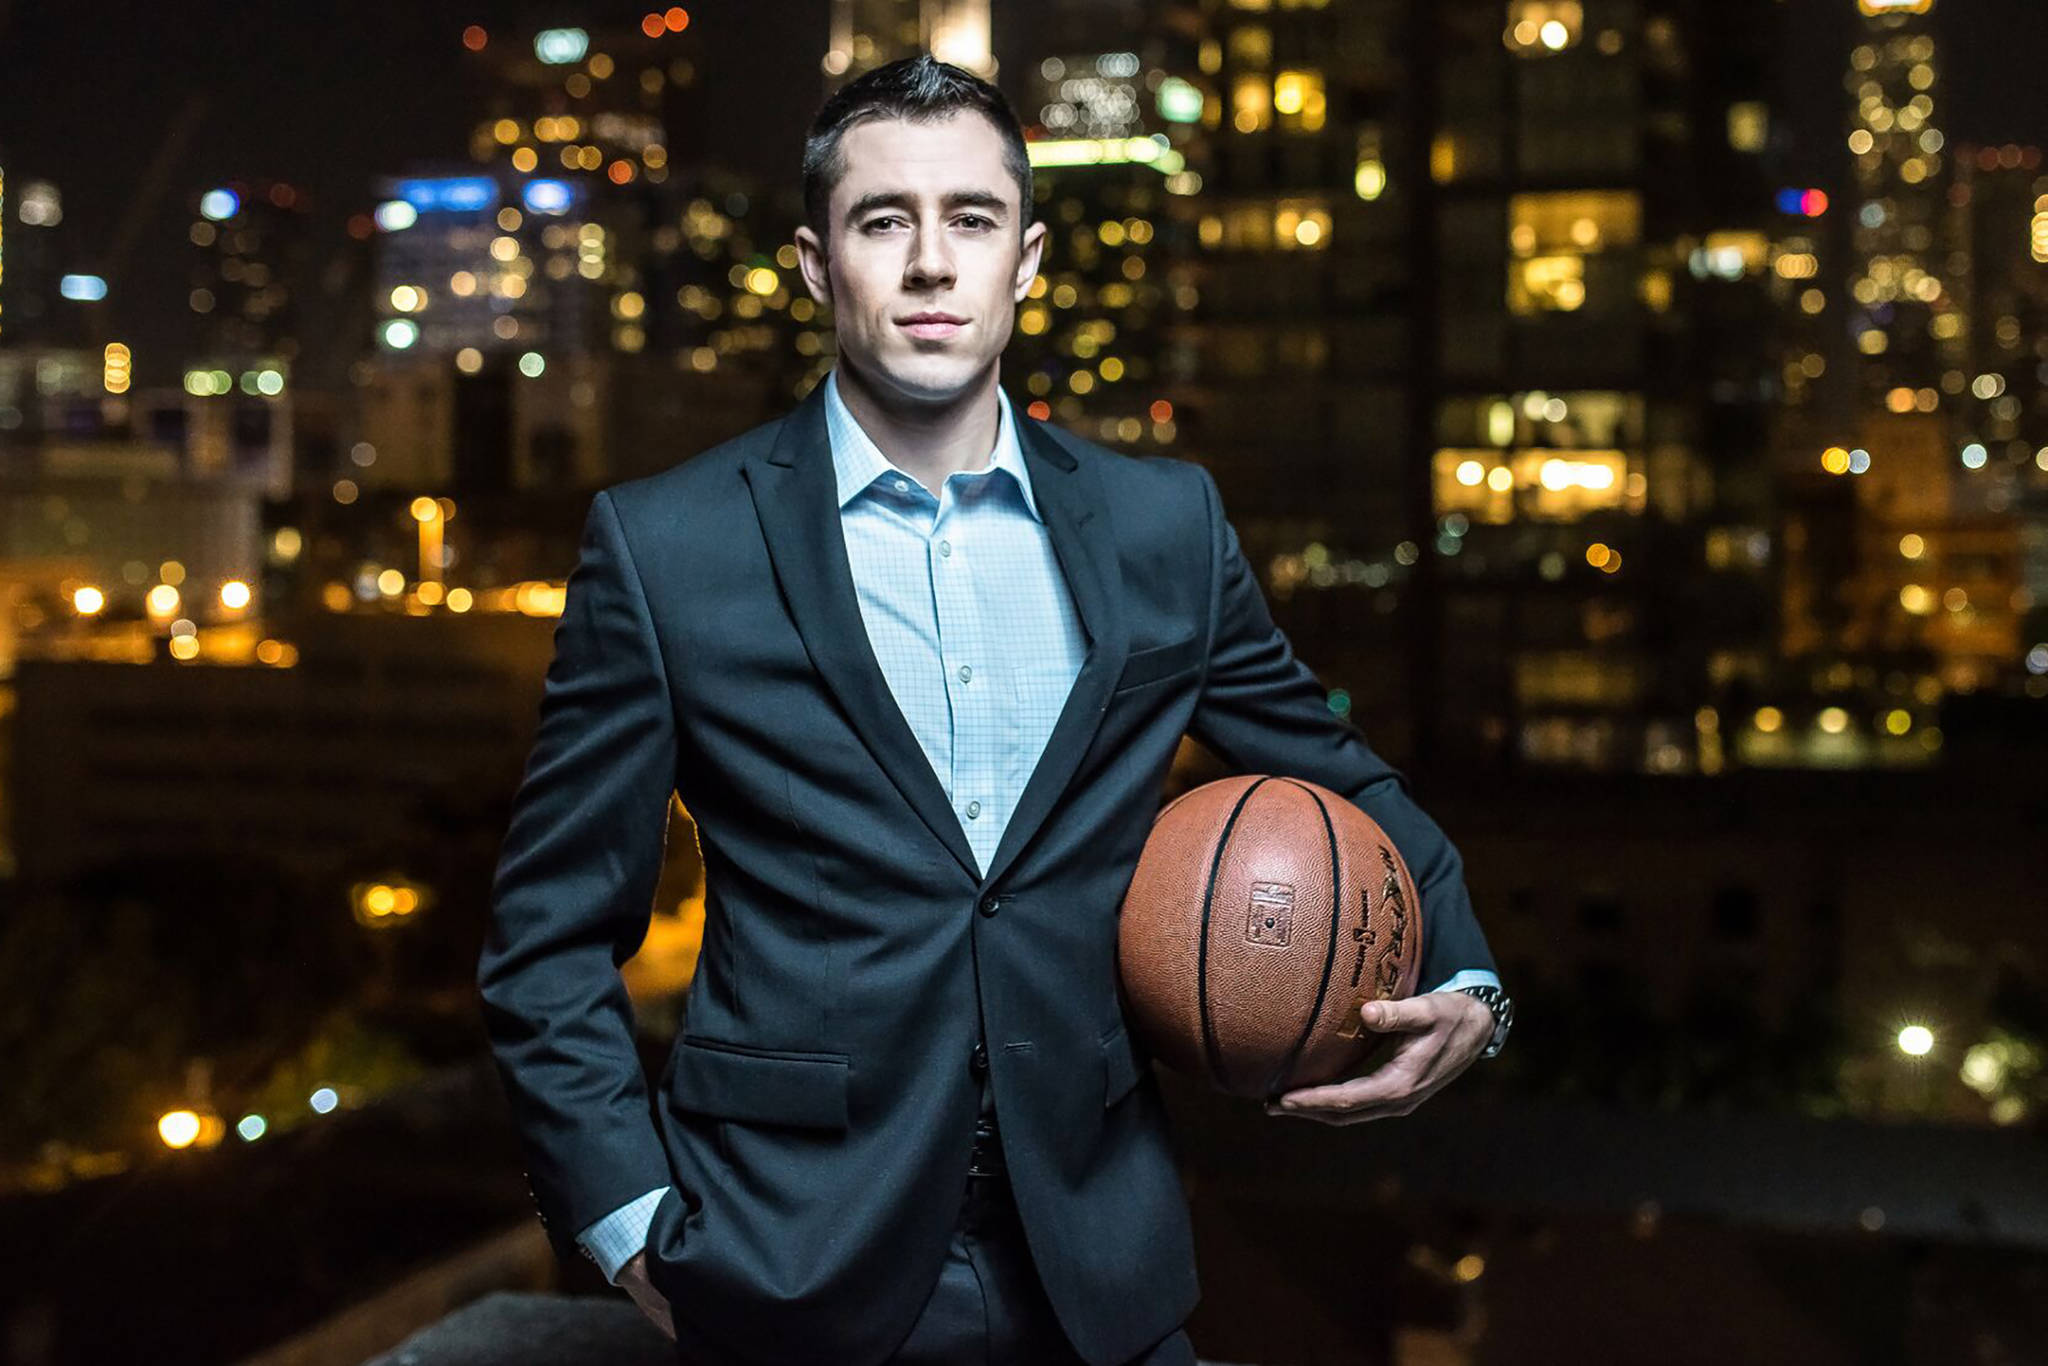 Before he was an actor, he was a small town hoops star. He’s back to share his story